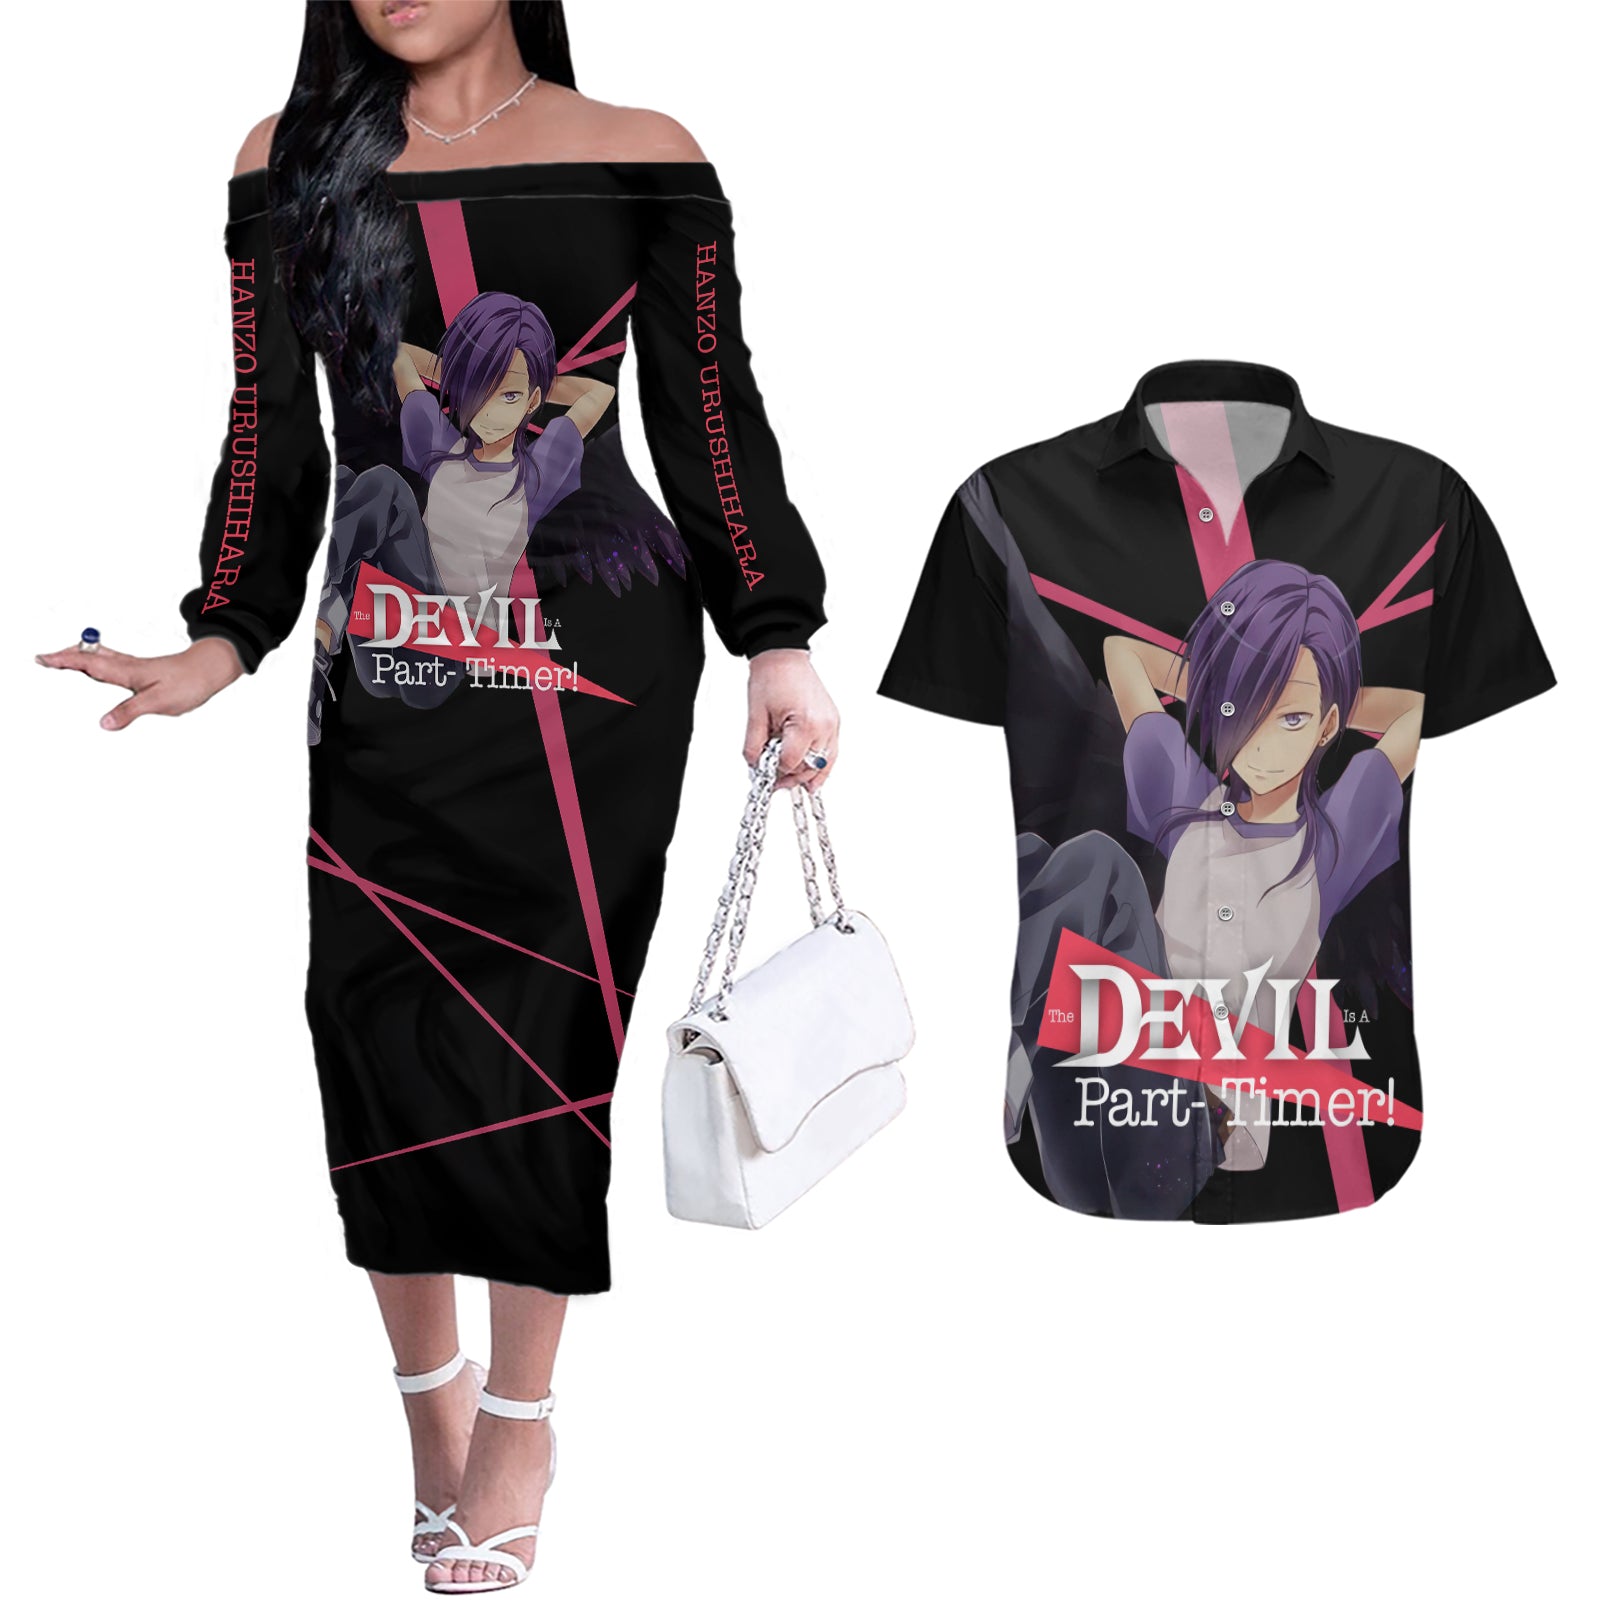 Hanzo Urushihara The Devil Part Timer Couples Matching Off The Shoulder Long Sleeve Dress and Hawaiian Shirt Anime Style